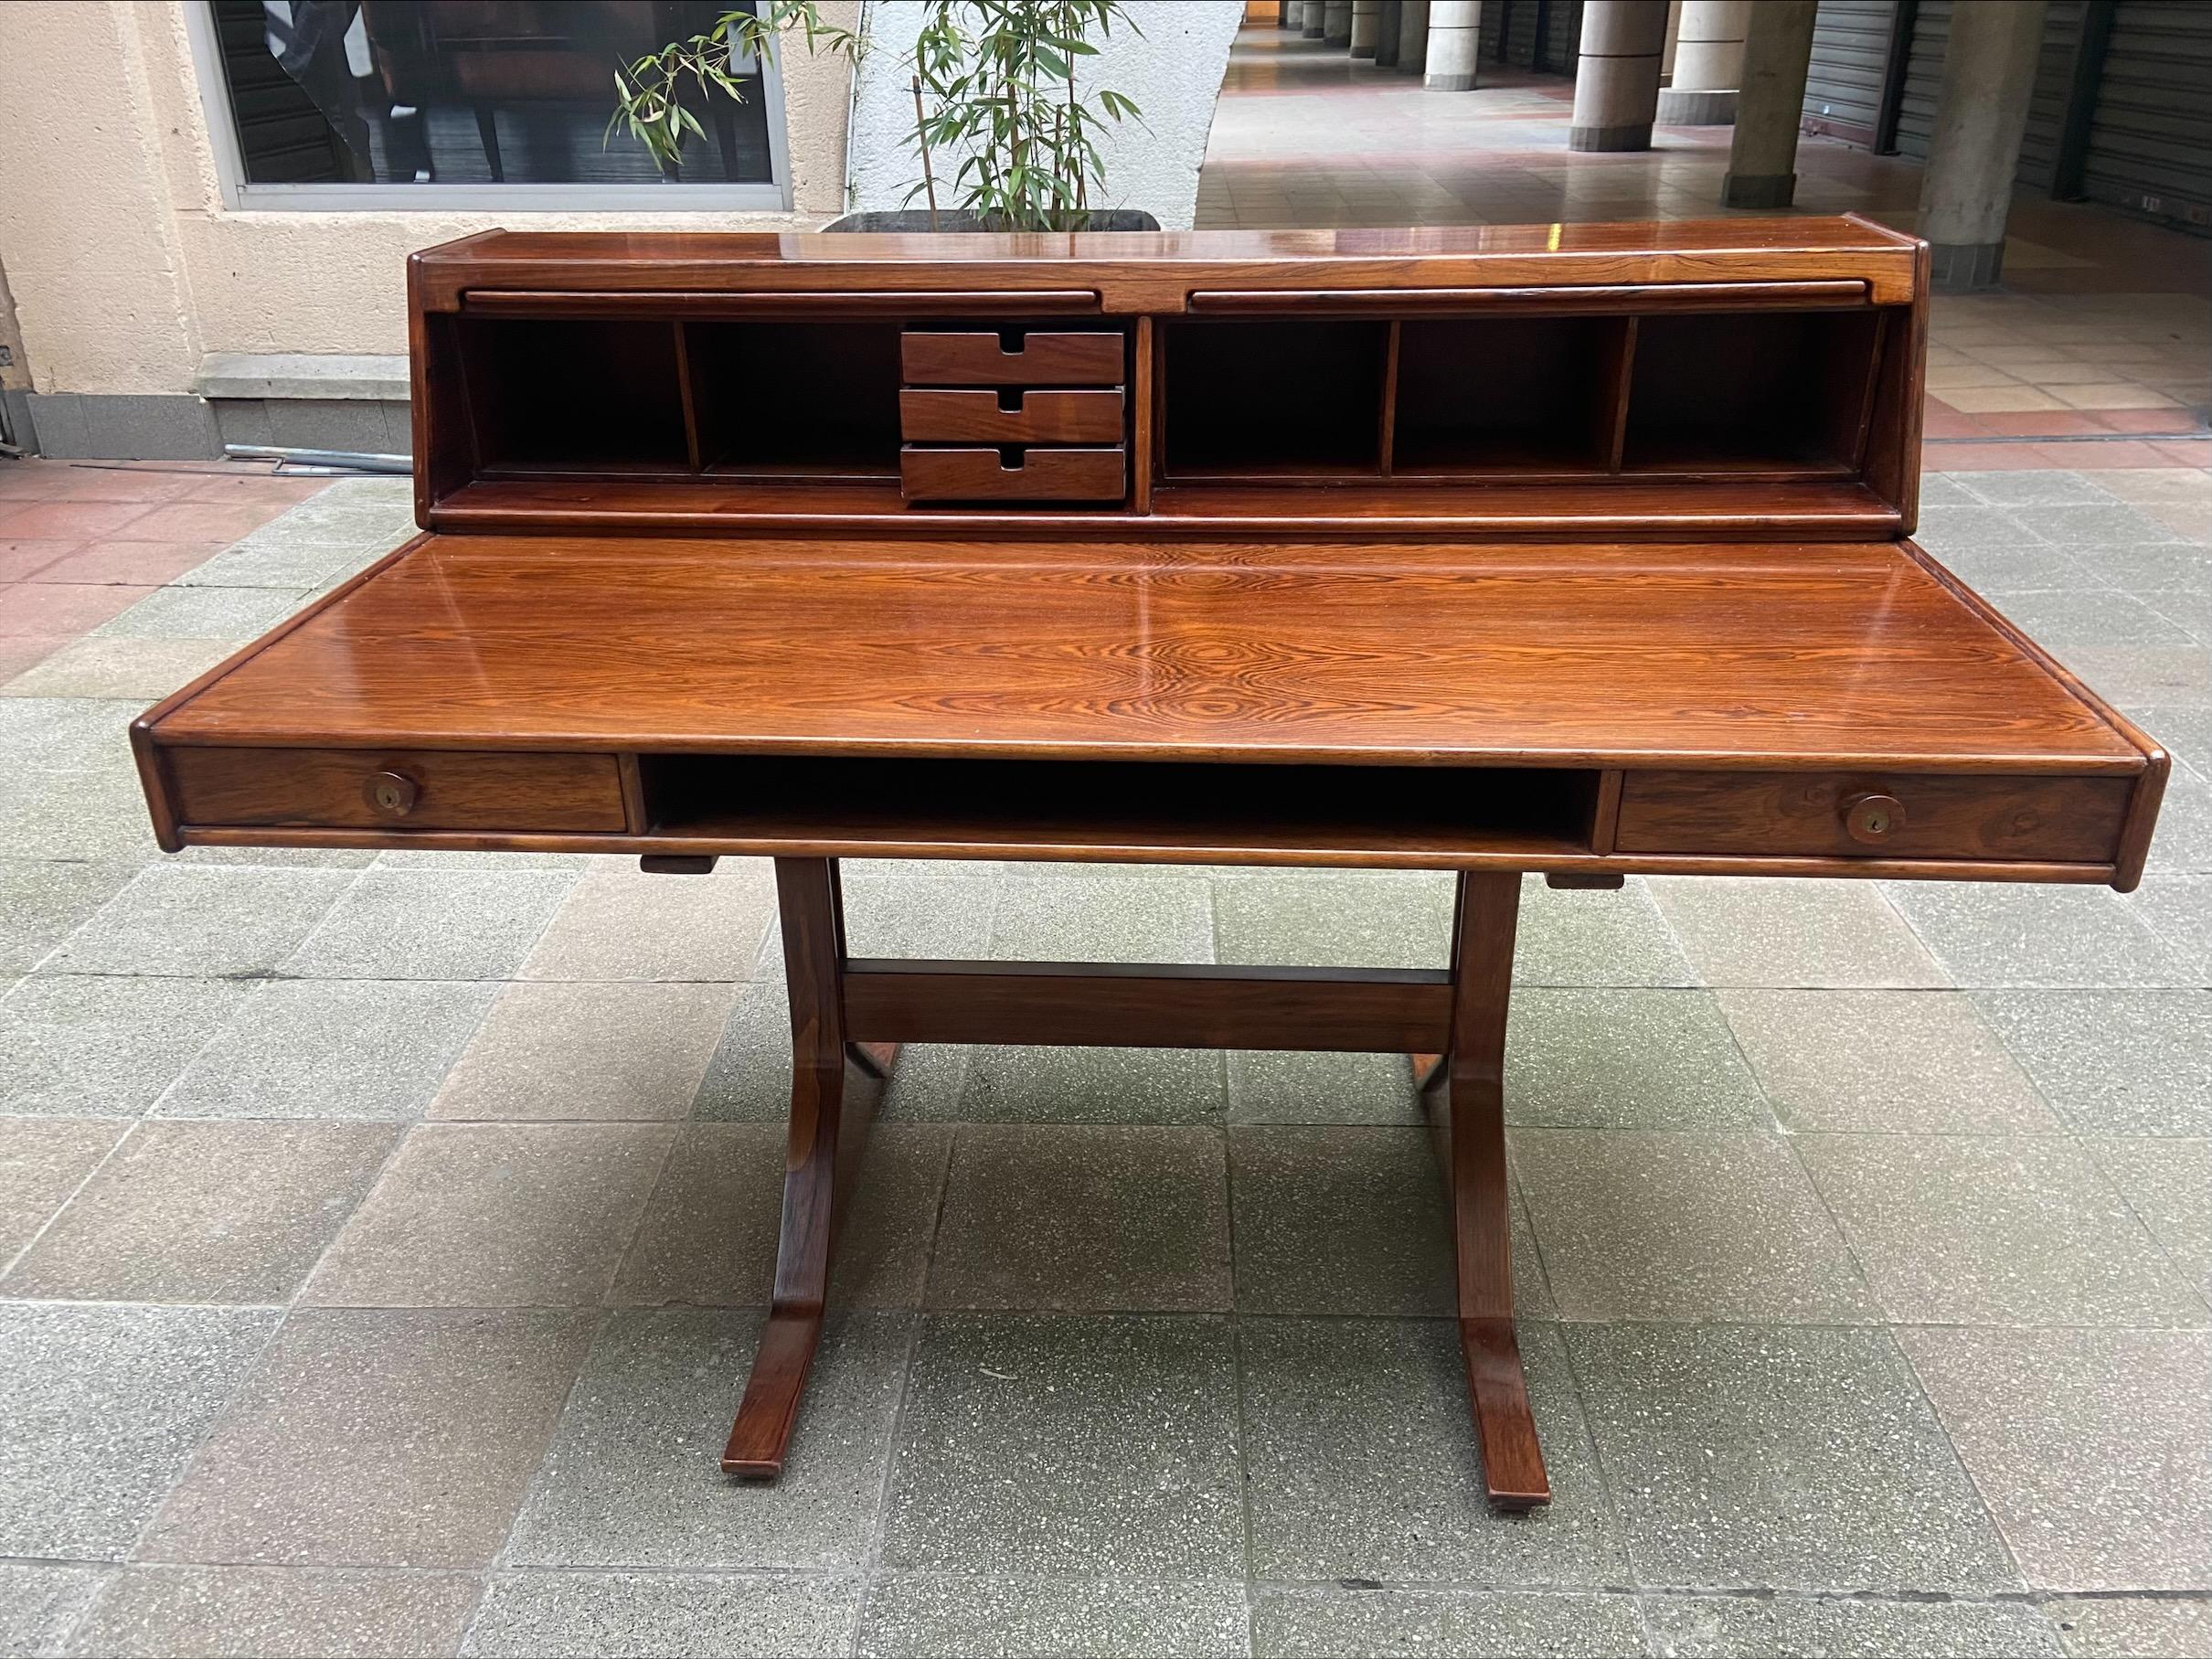 Desk model 530 - Gianfranco Frattini - Circa 1957
Bernini edition (label in right drawer)

Rosewood
H95xW130xD79.5cm
In a perfect state
The desk features a removable storage unit with tambour doors on top, revealing versatile storage and three